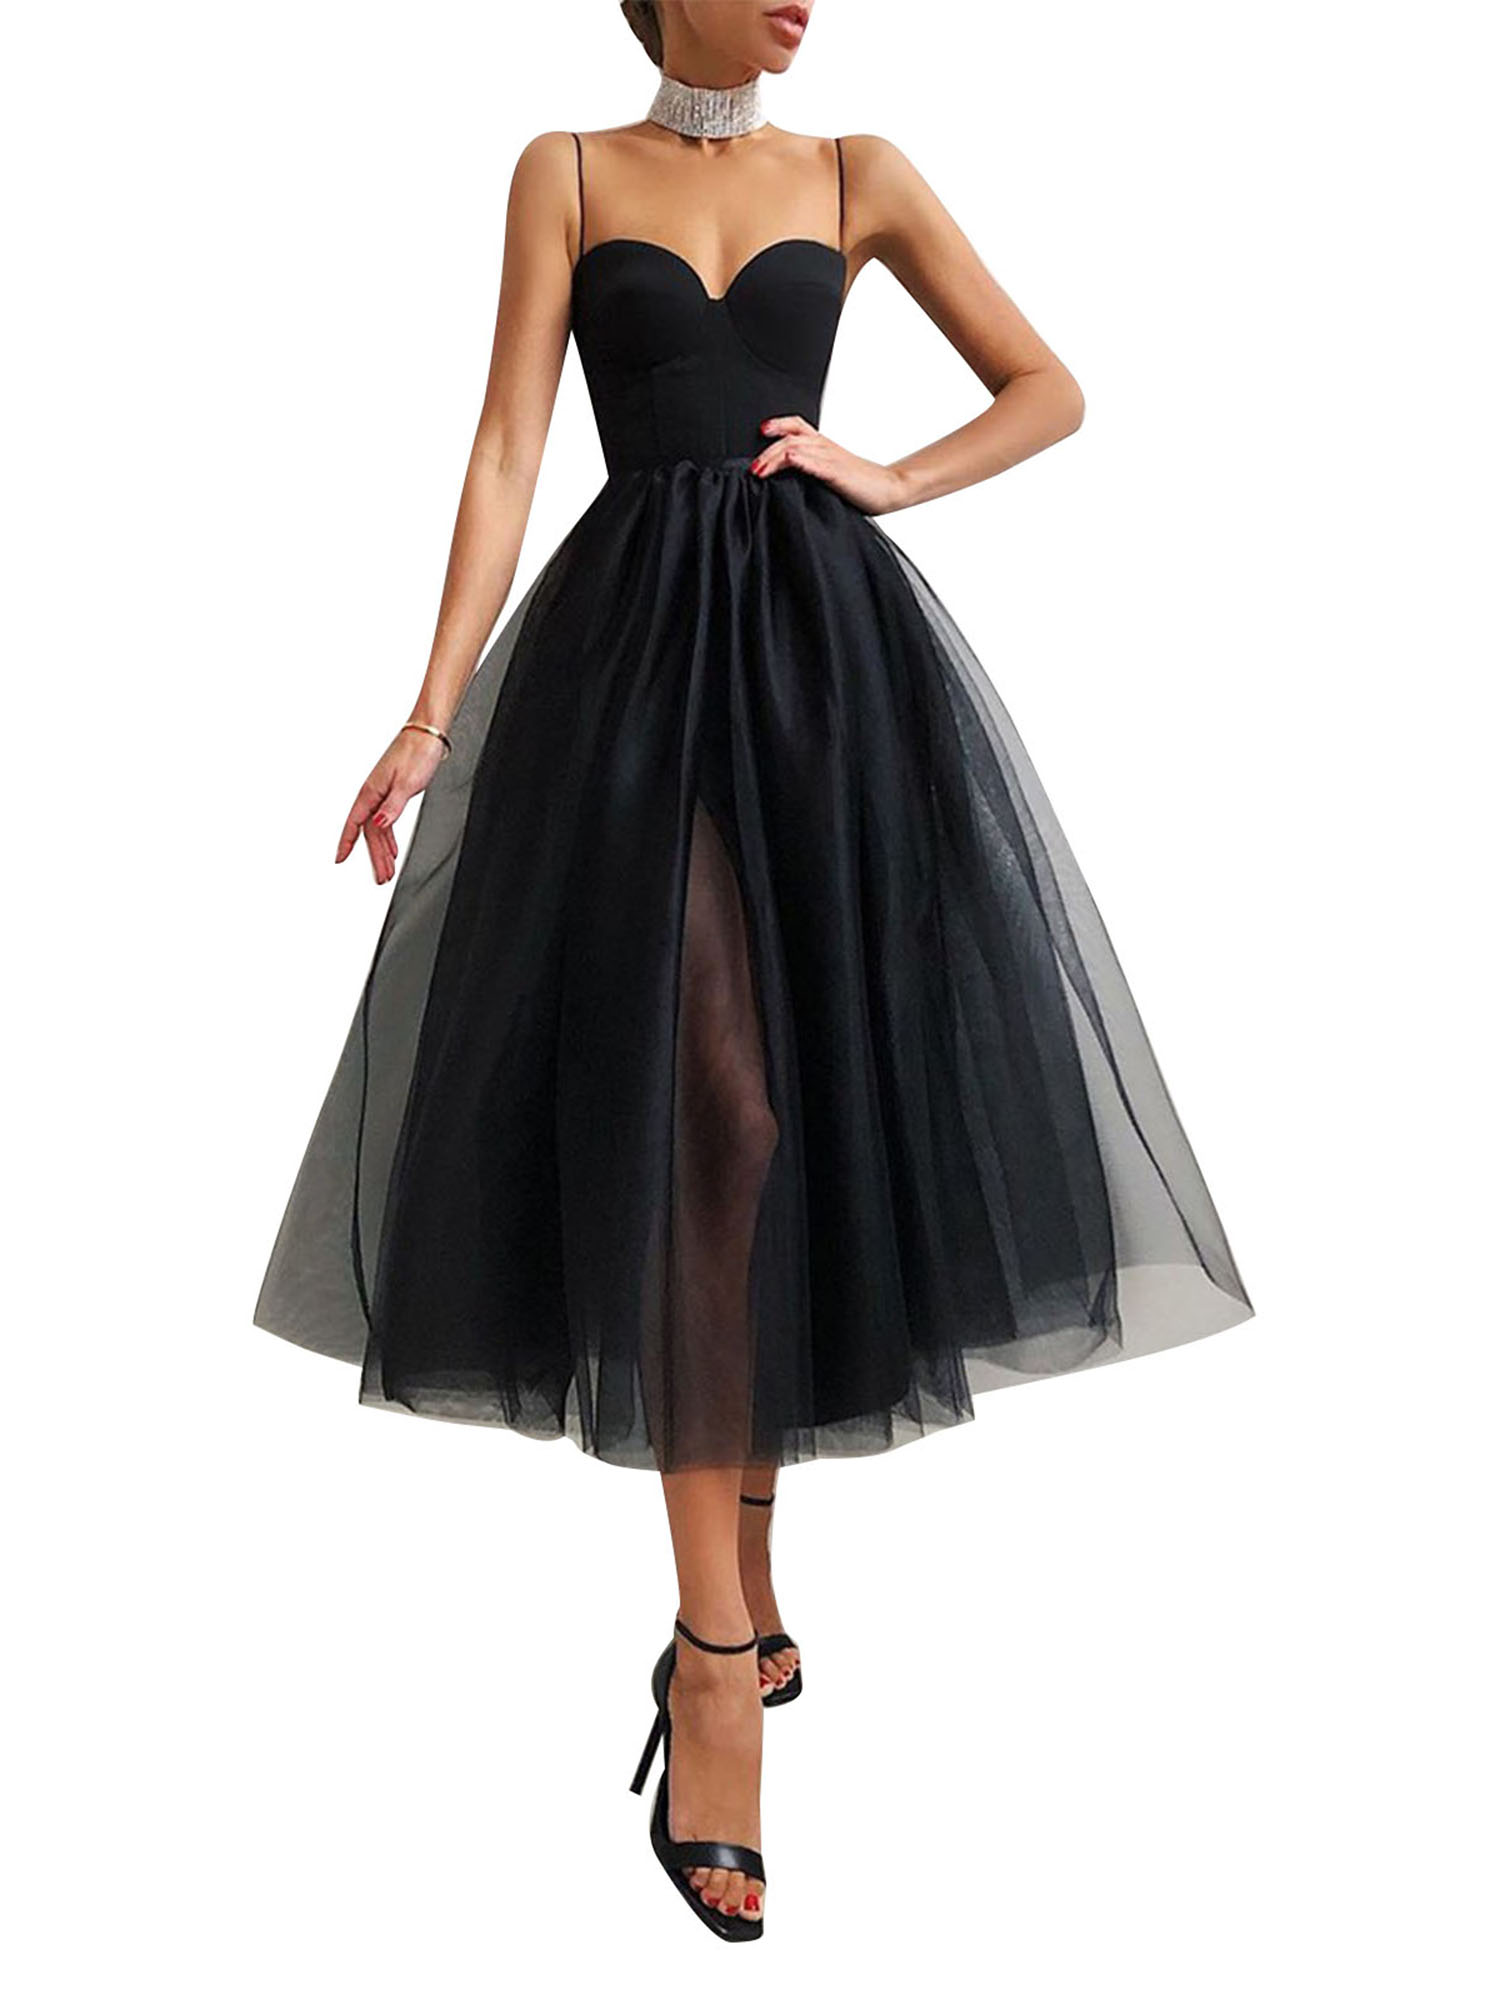 Women Tulle Cocktail Party Gown Dress ...